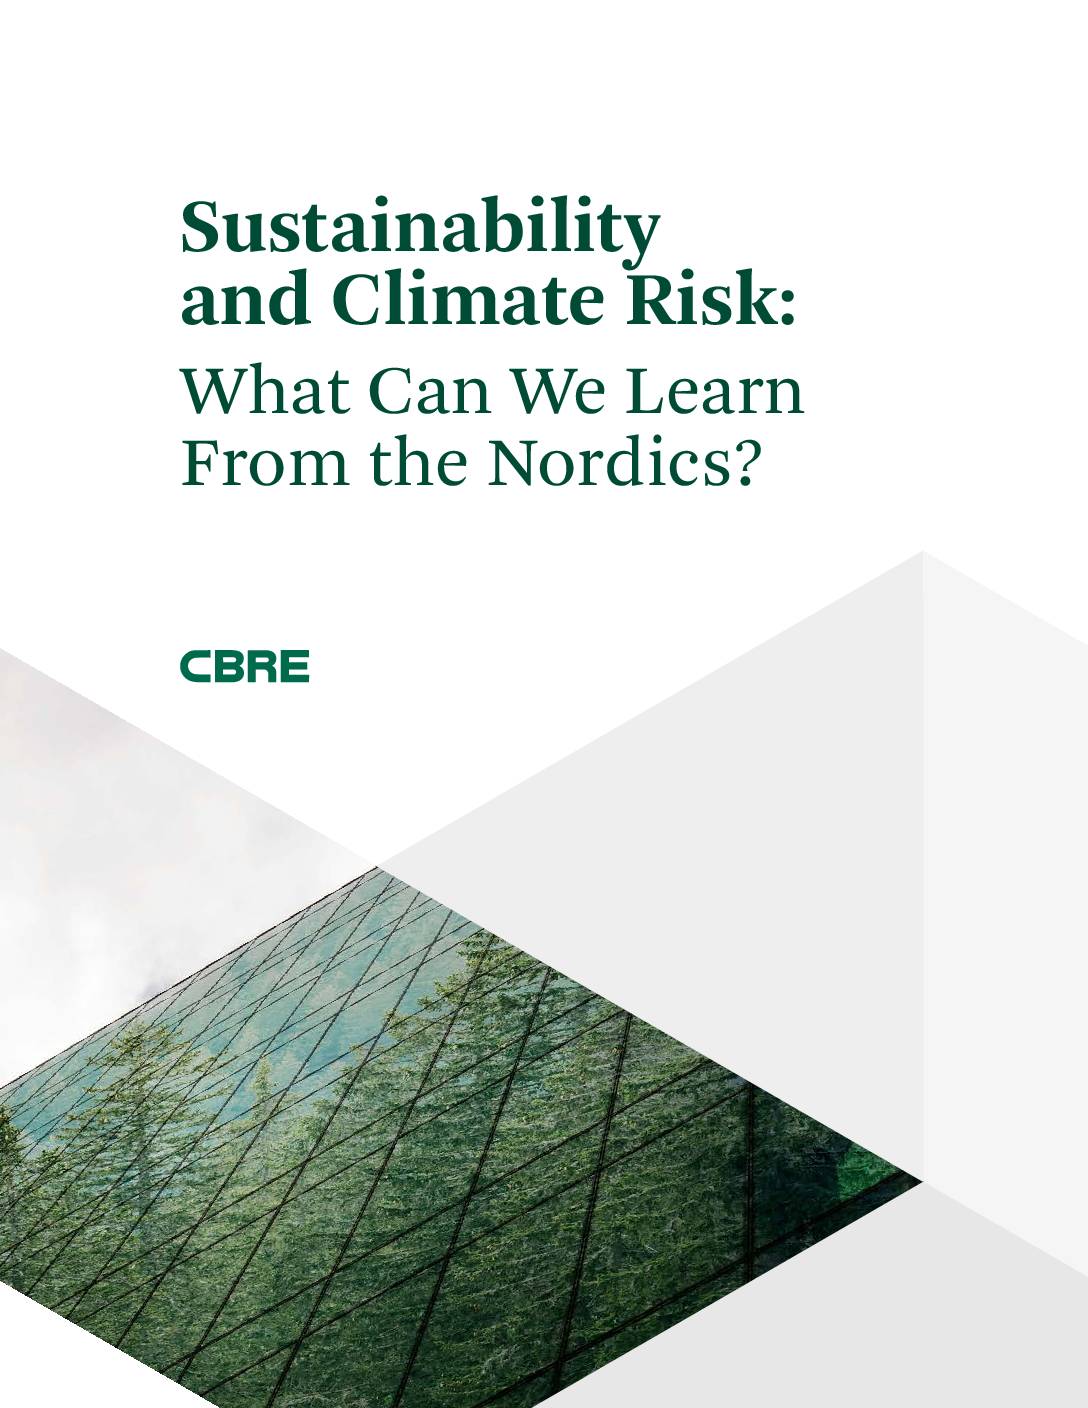 Sustainability and Climate Risk: What Can We Learn From The Nordics?